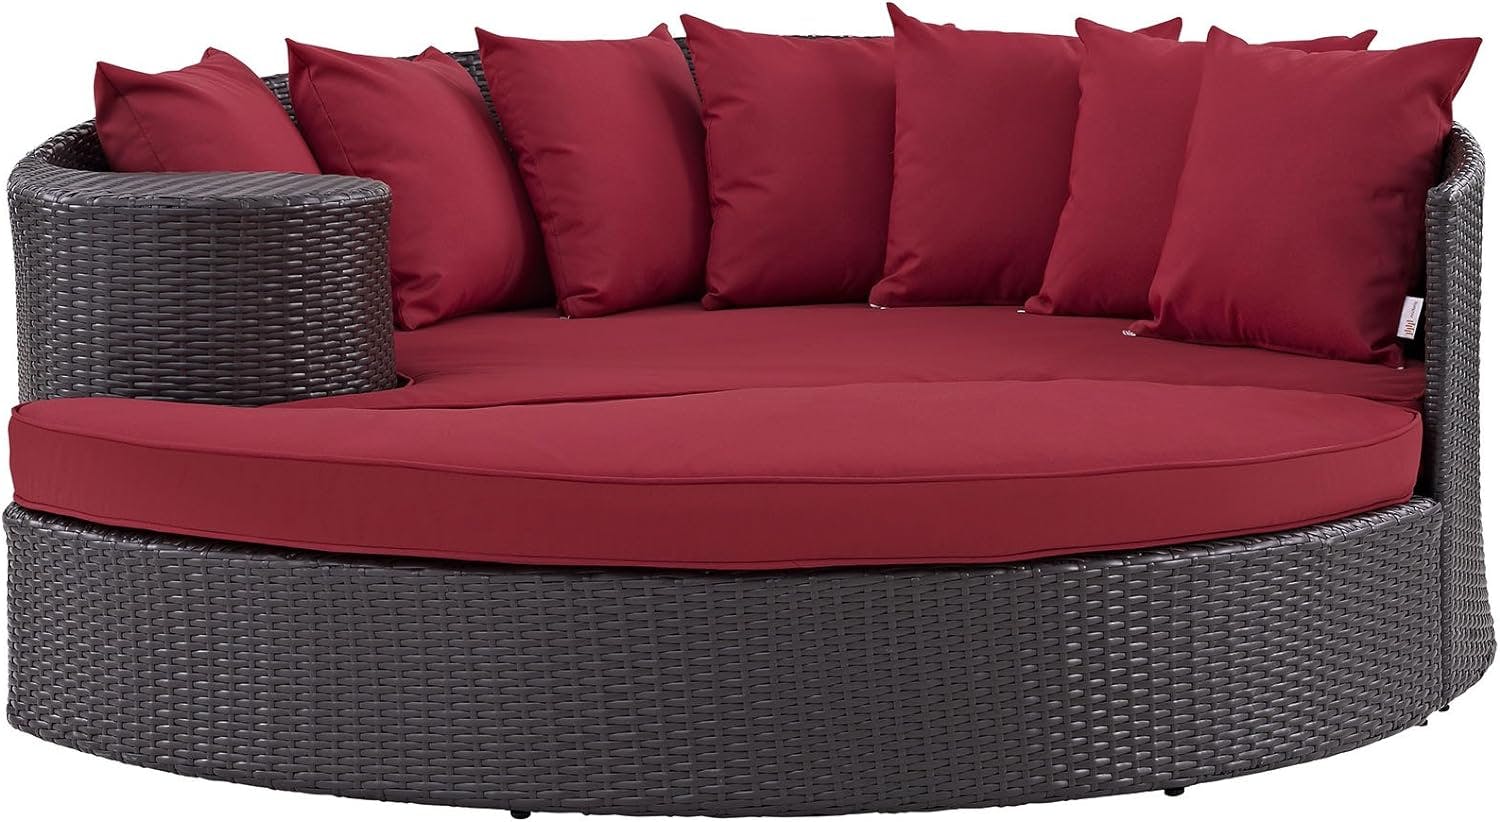 Espresso Red Rattan Weave Outdoor Patio Daybed with Cushions